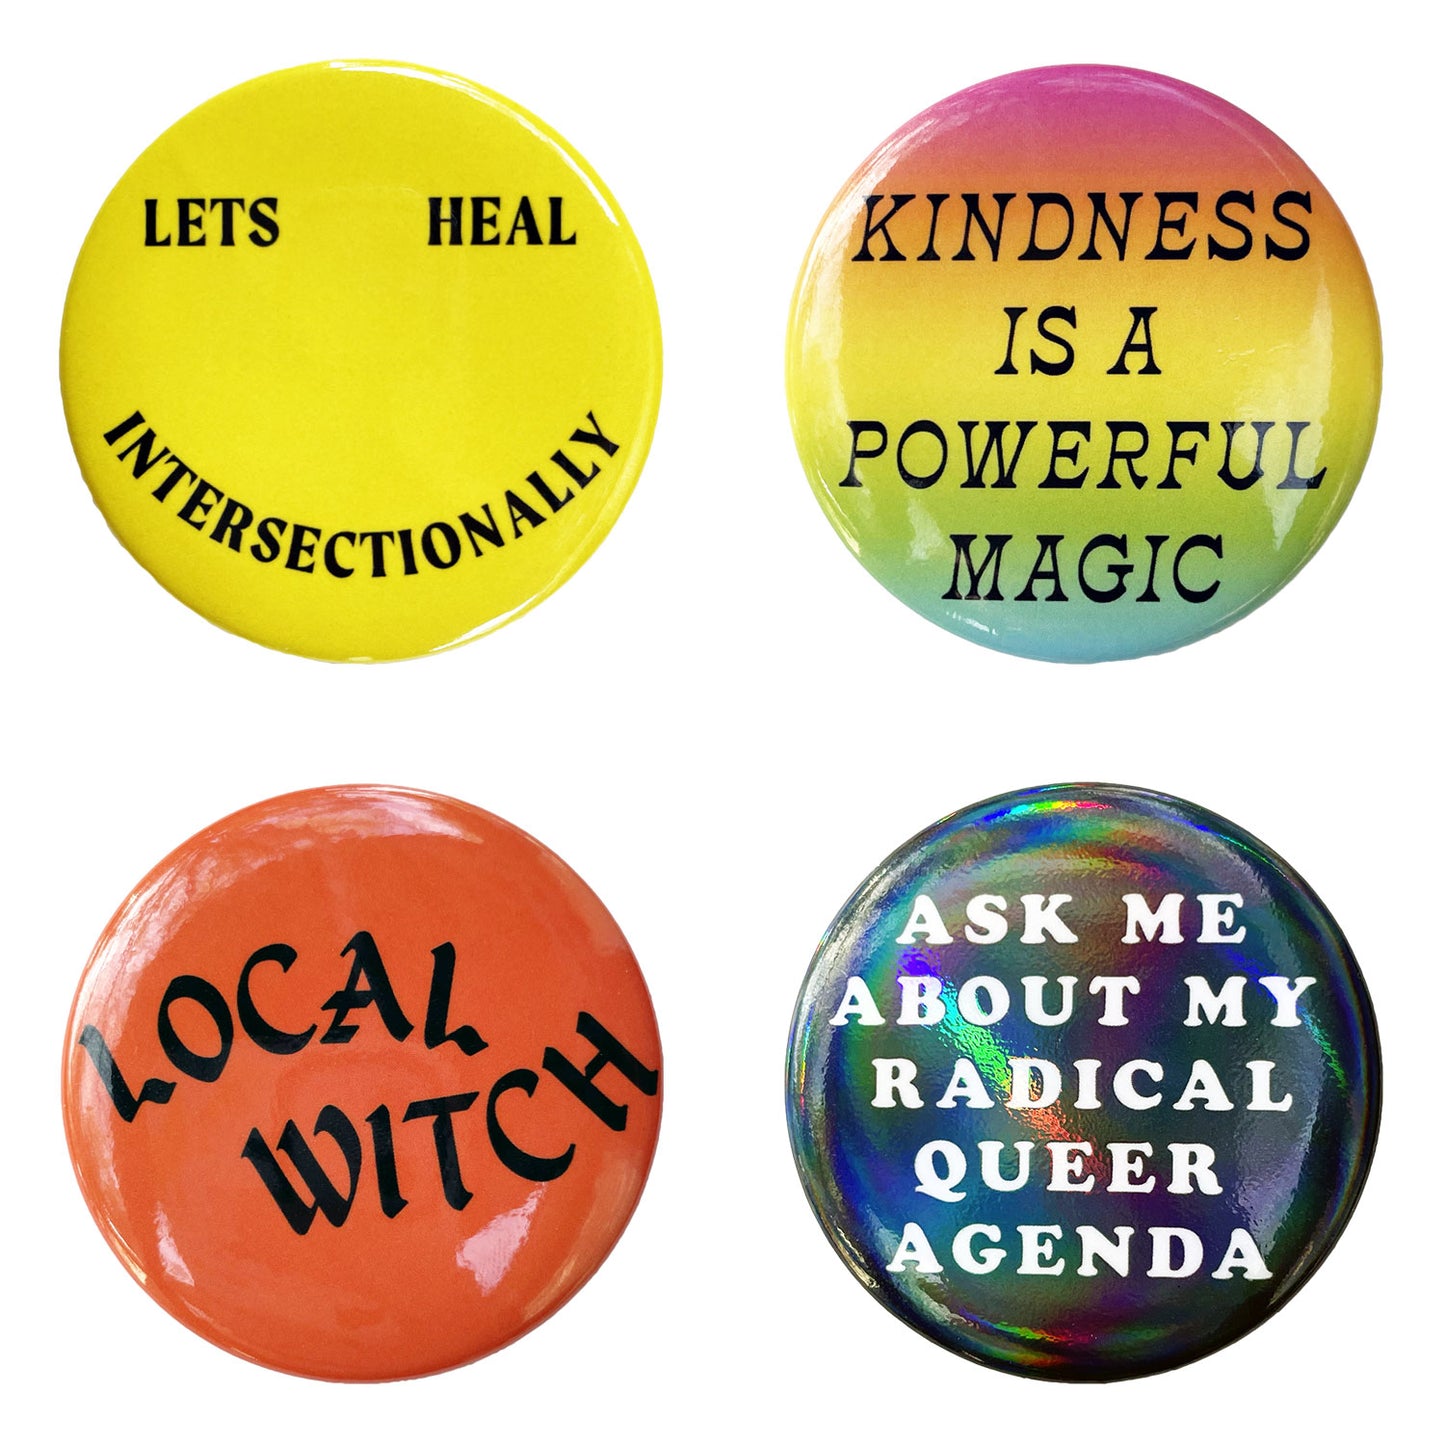 Kindness Is A Powerful Magic | 2.25" Big Button